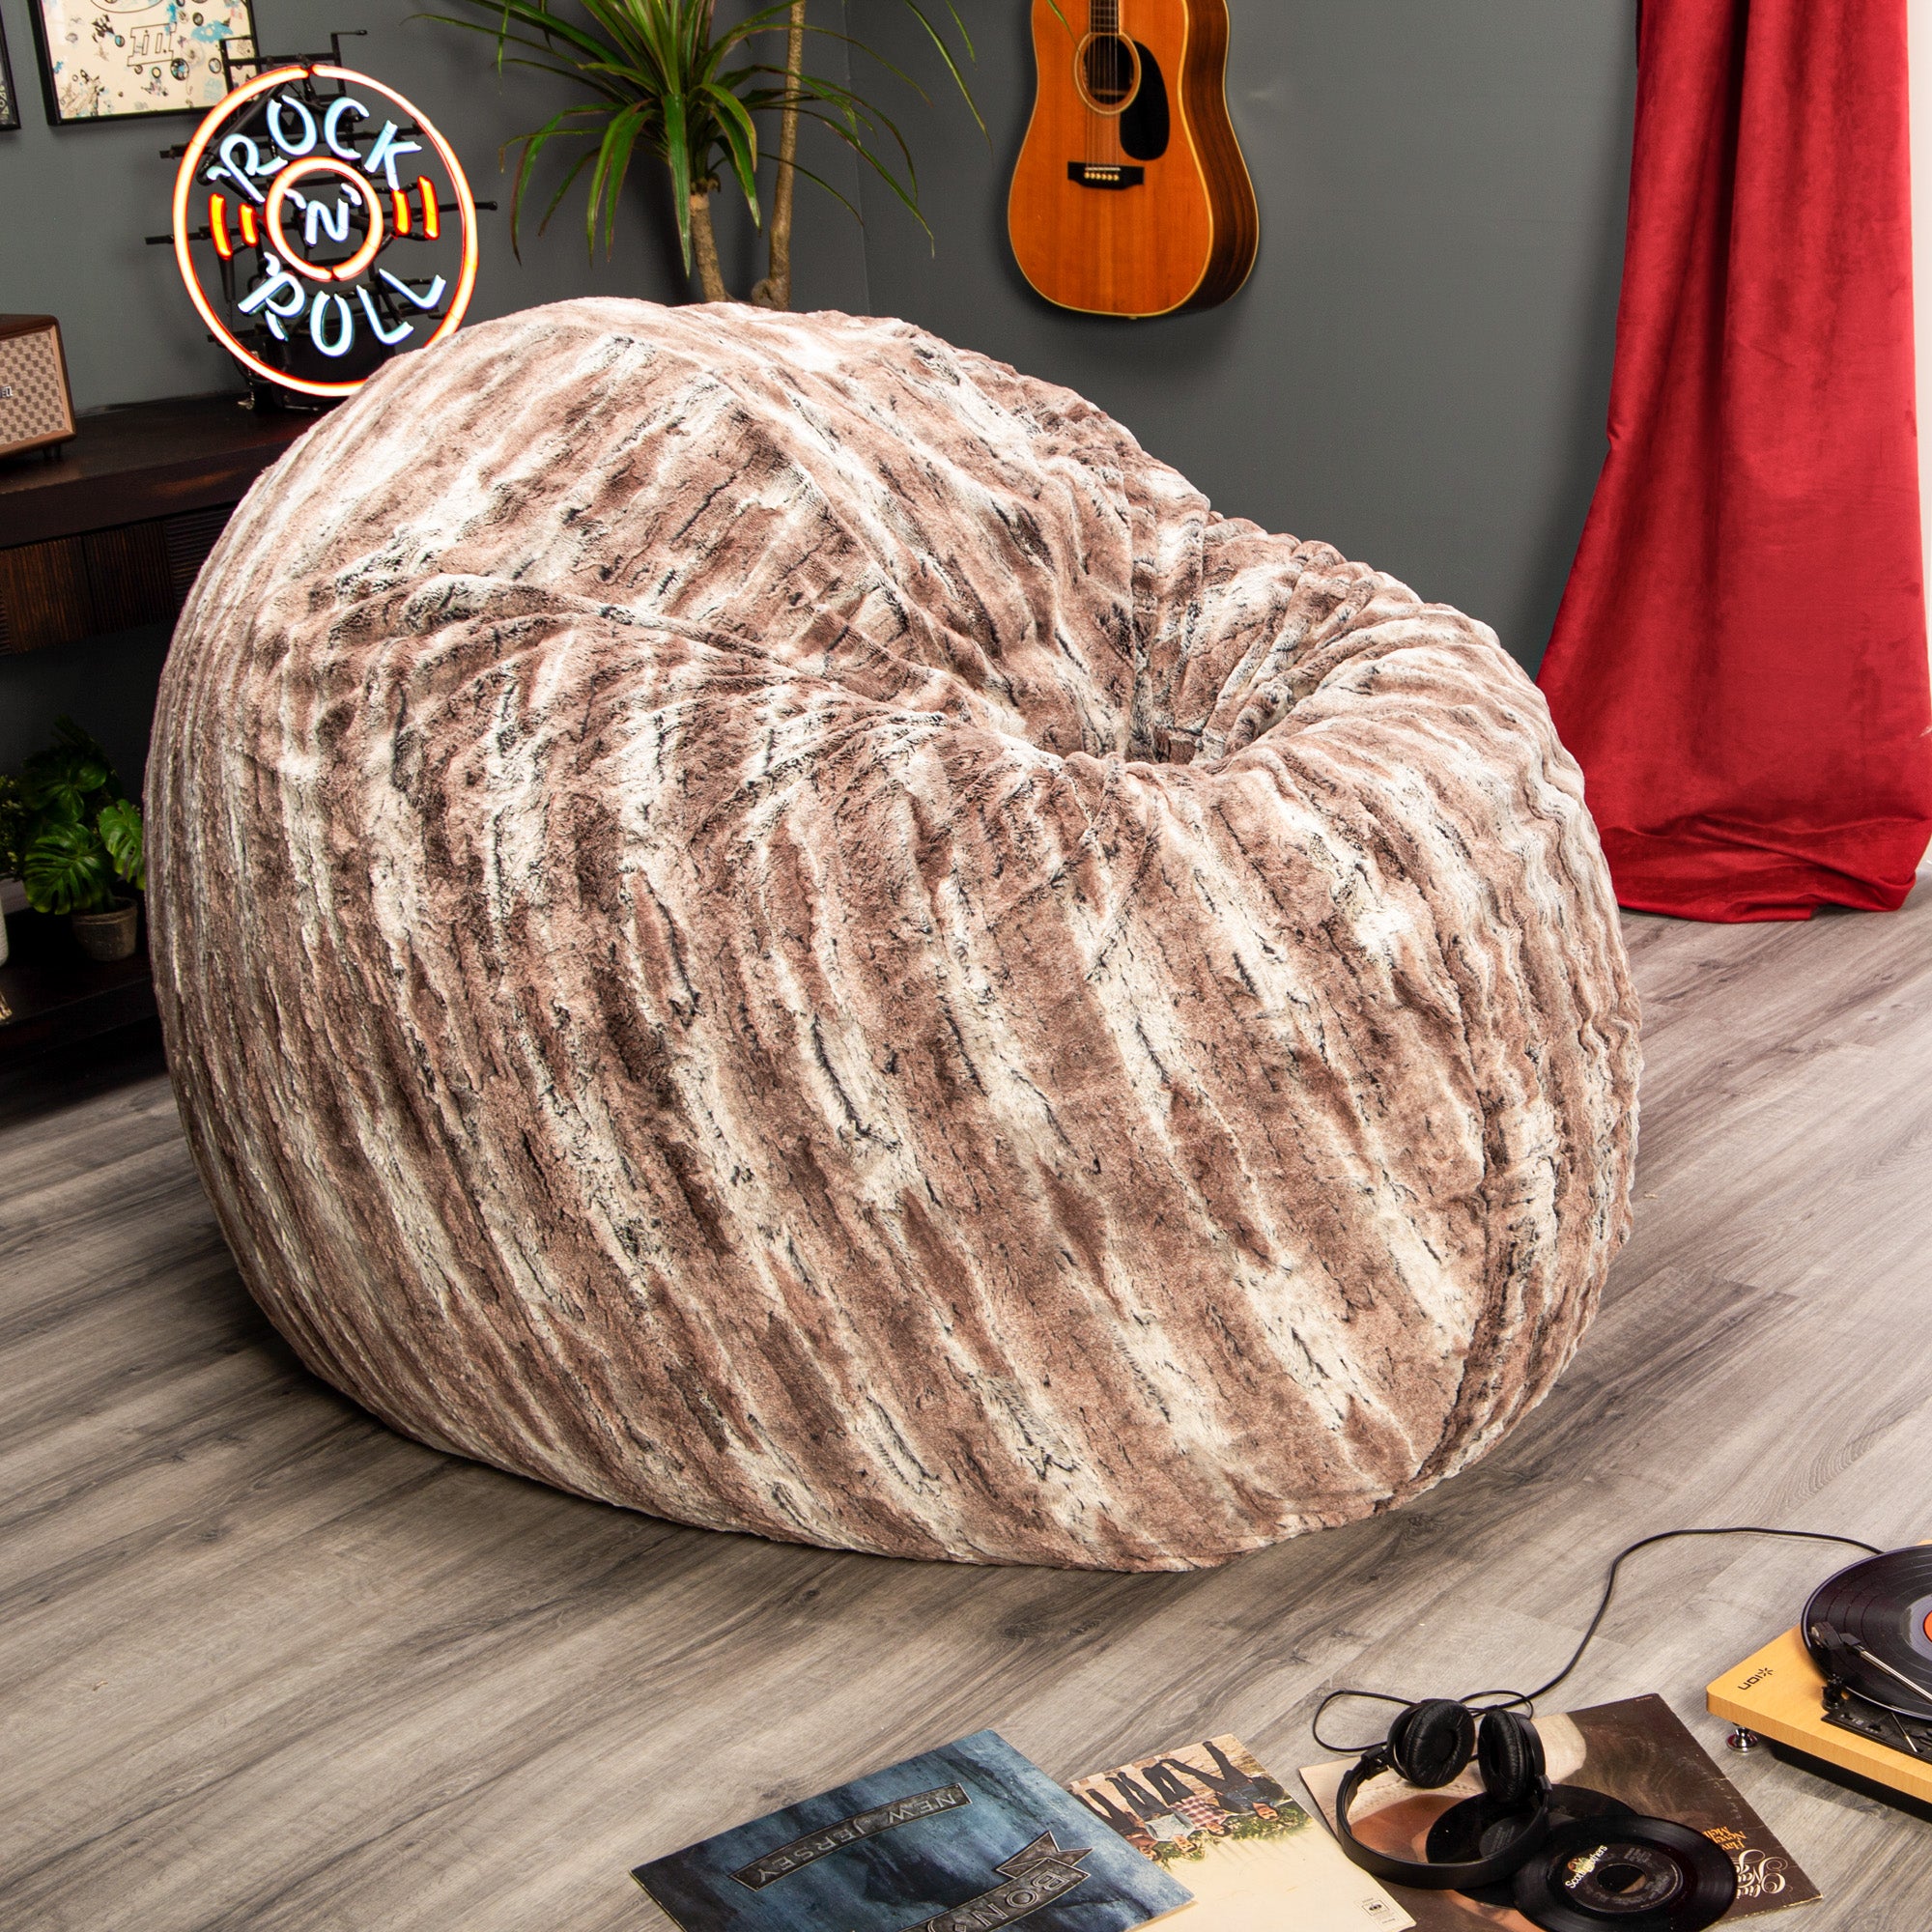 Jaxx 6 Foot Cocoon - Large Bean Bag Chair for Adults in Premium Luxe F